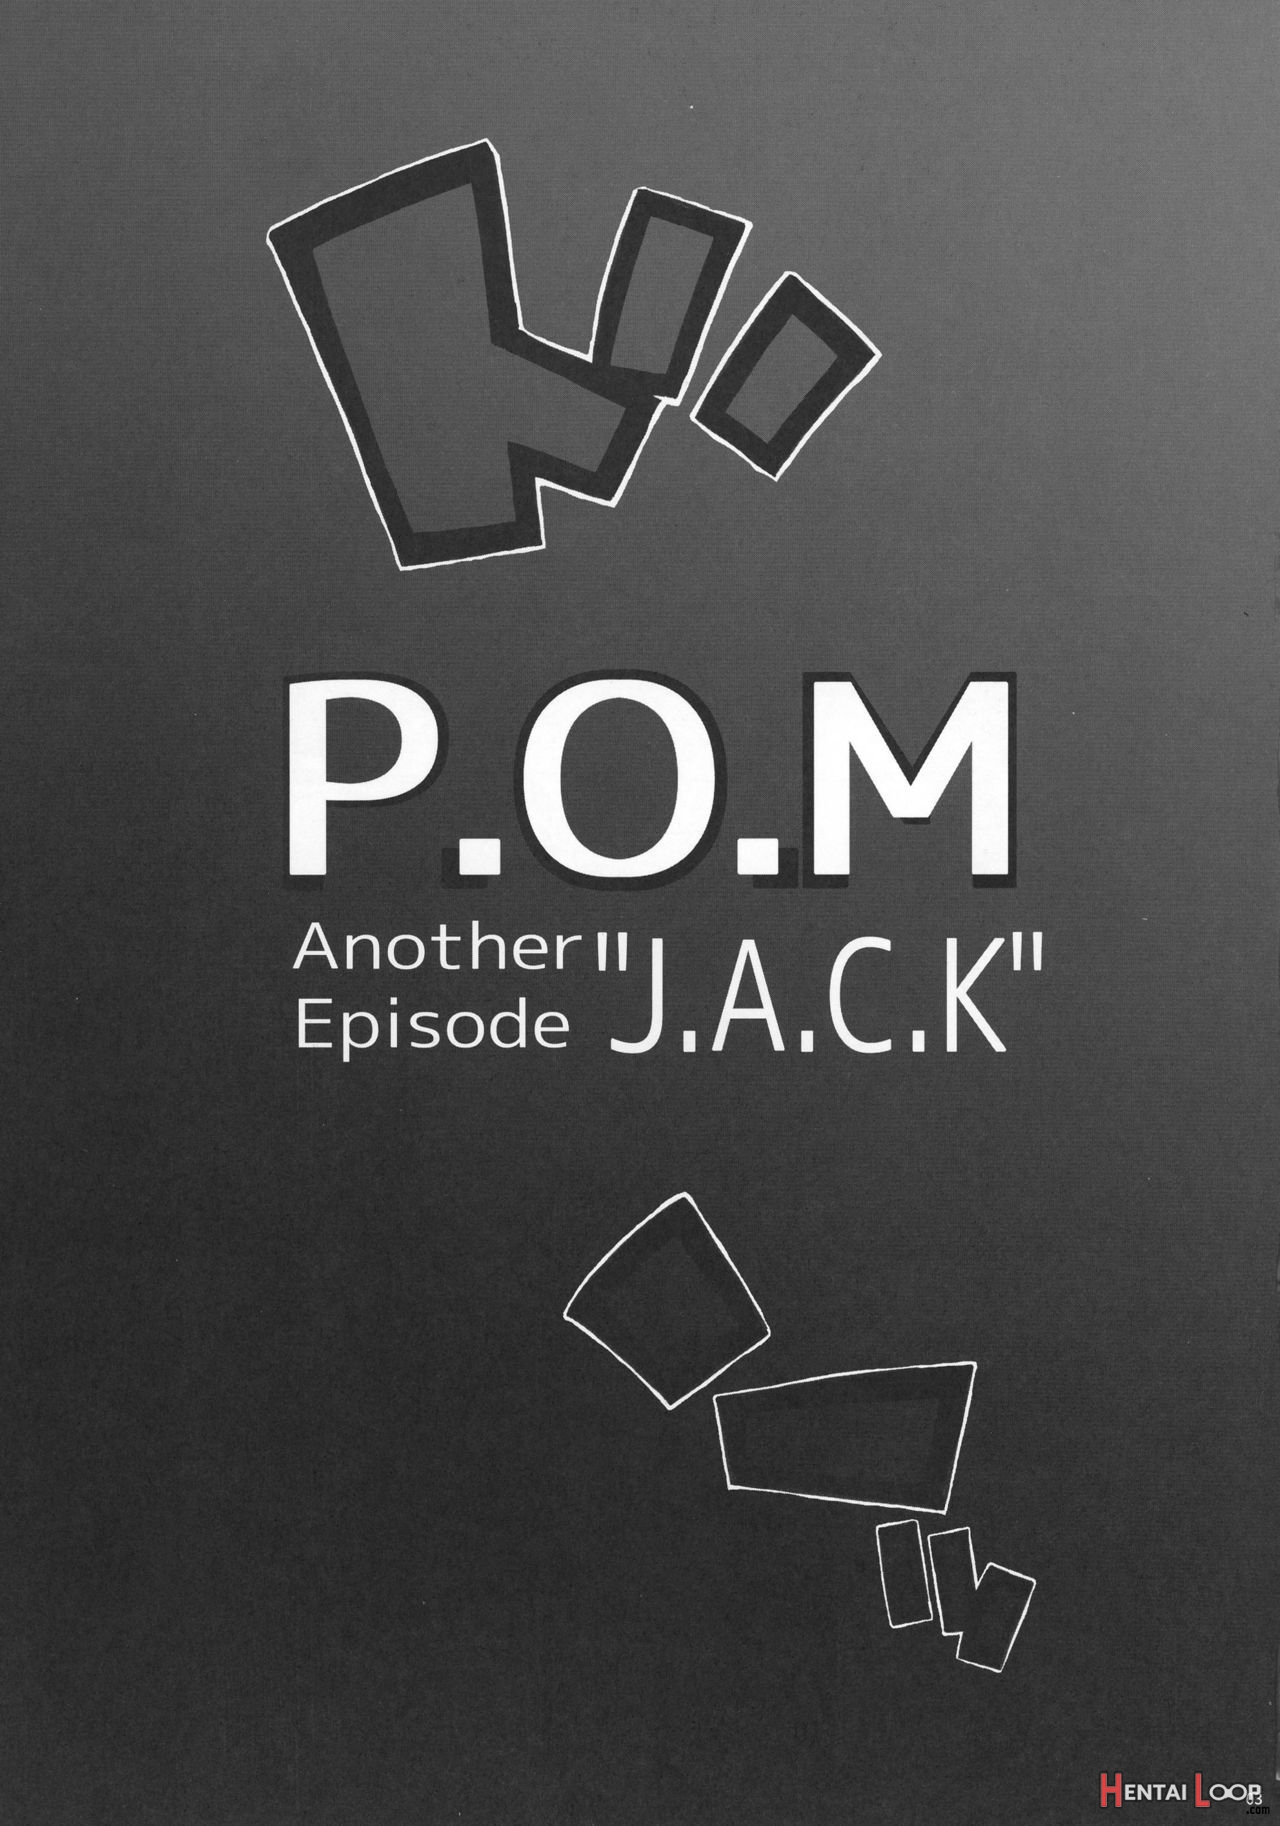 P.o.m Another Episode "j.a.c.k" page 5